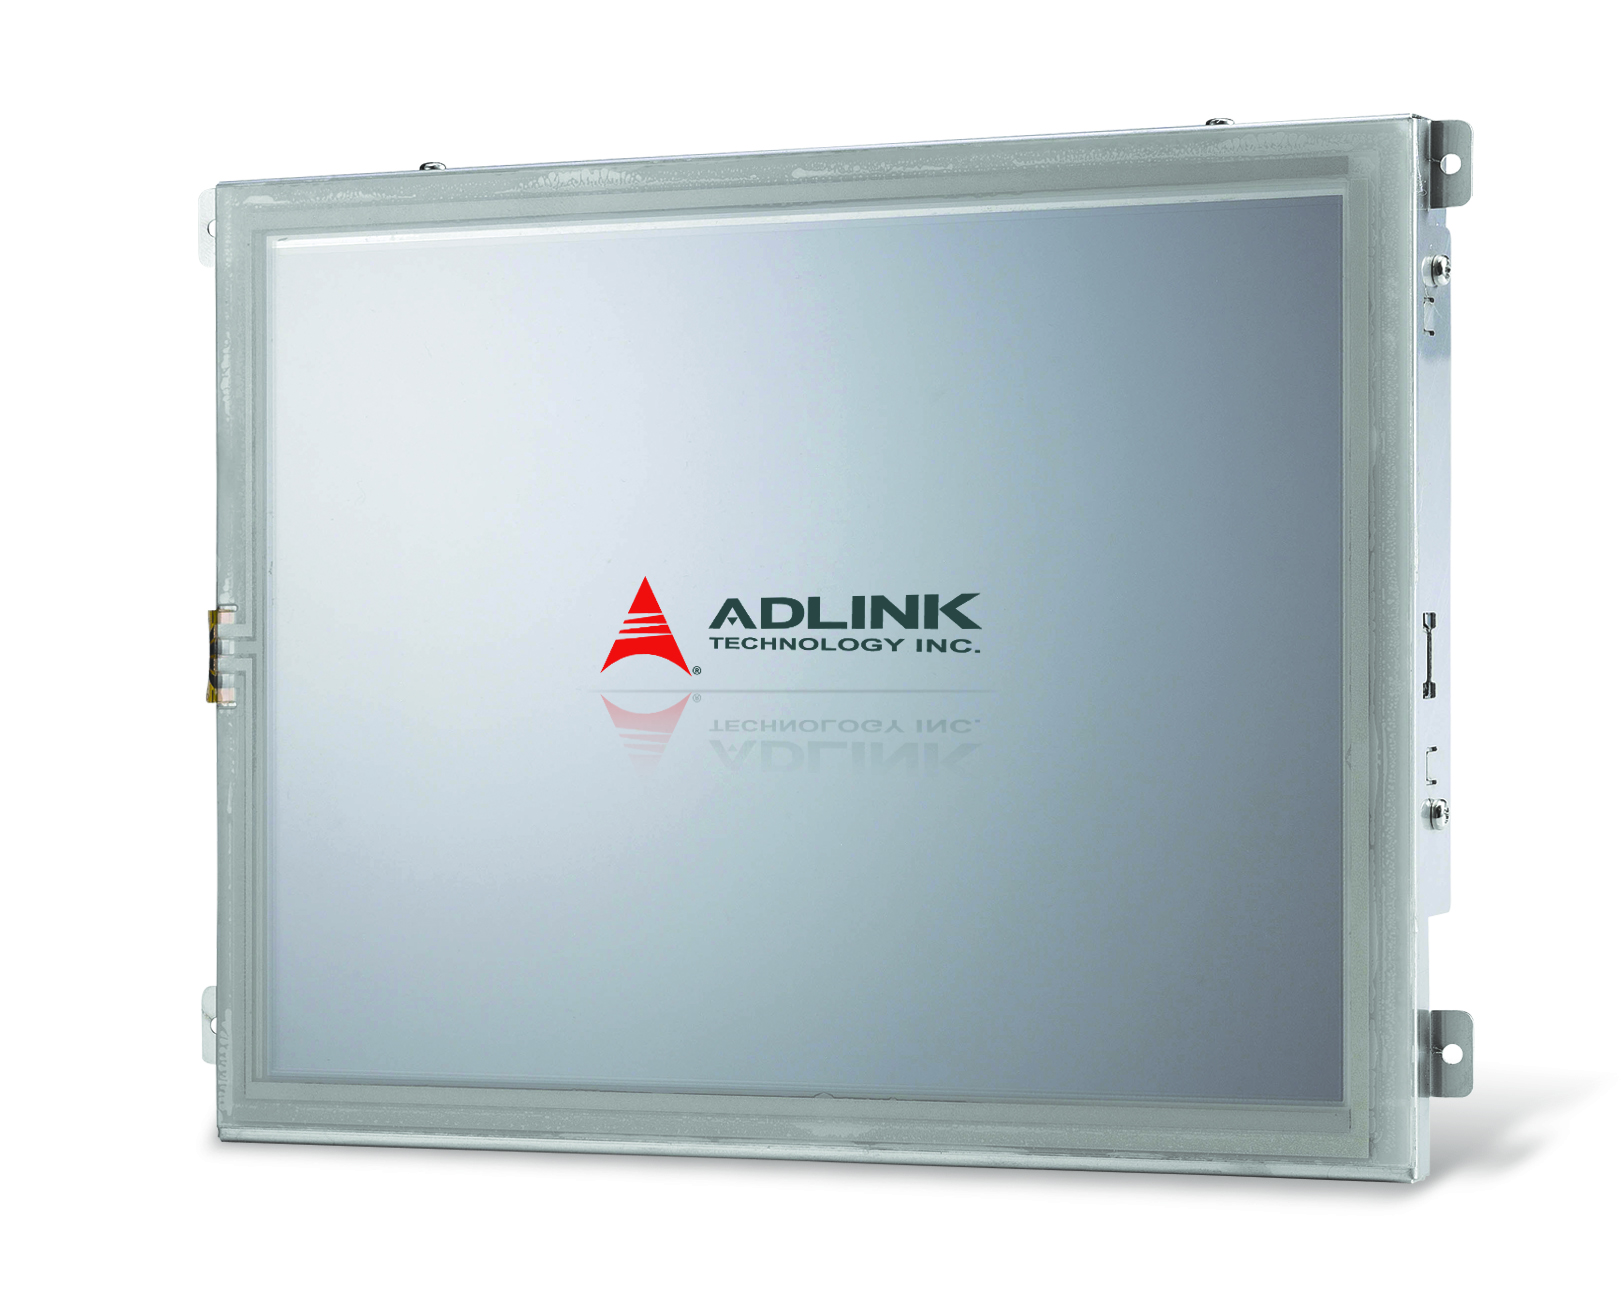 Industrial-Grade “Smart Panel” Products